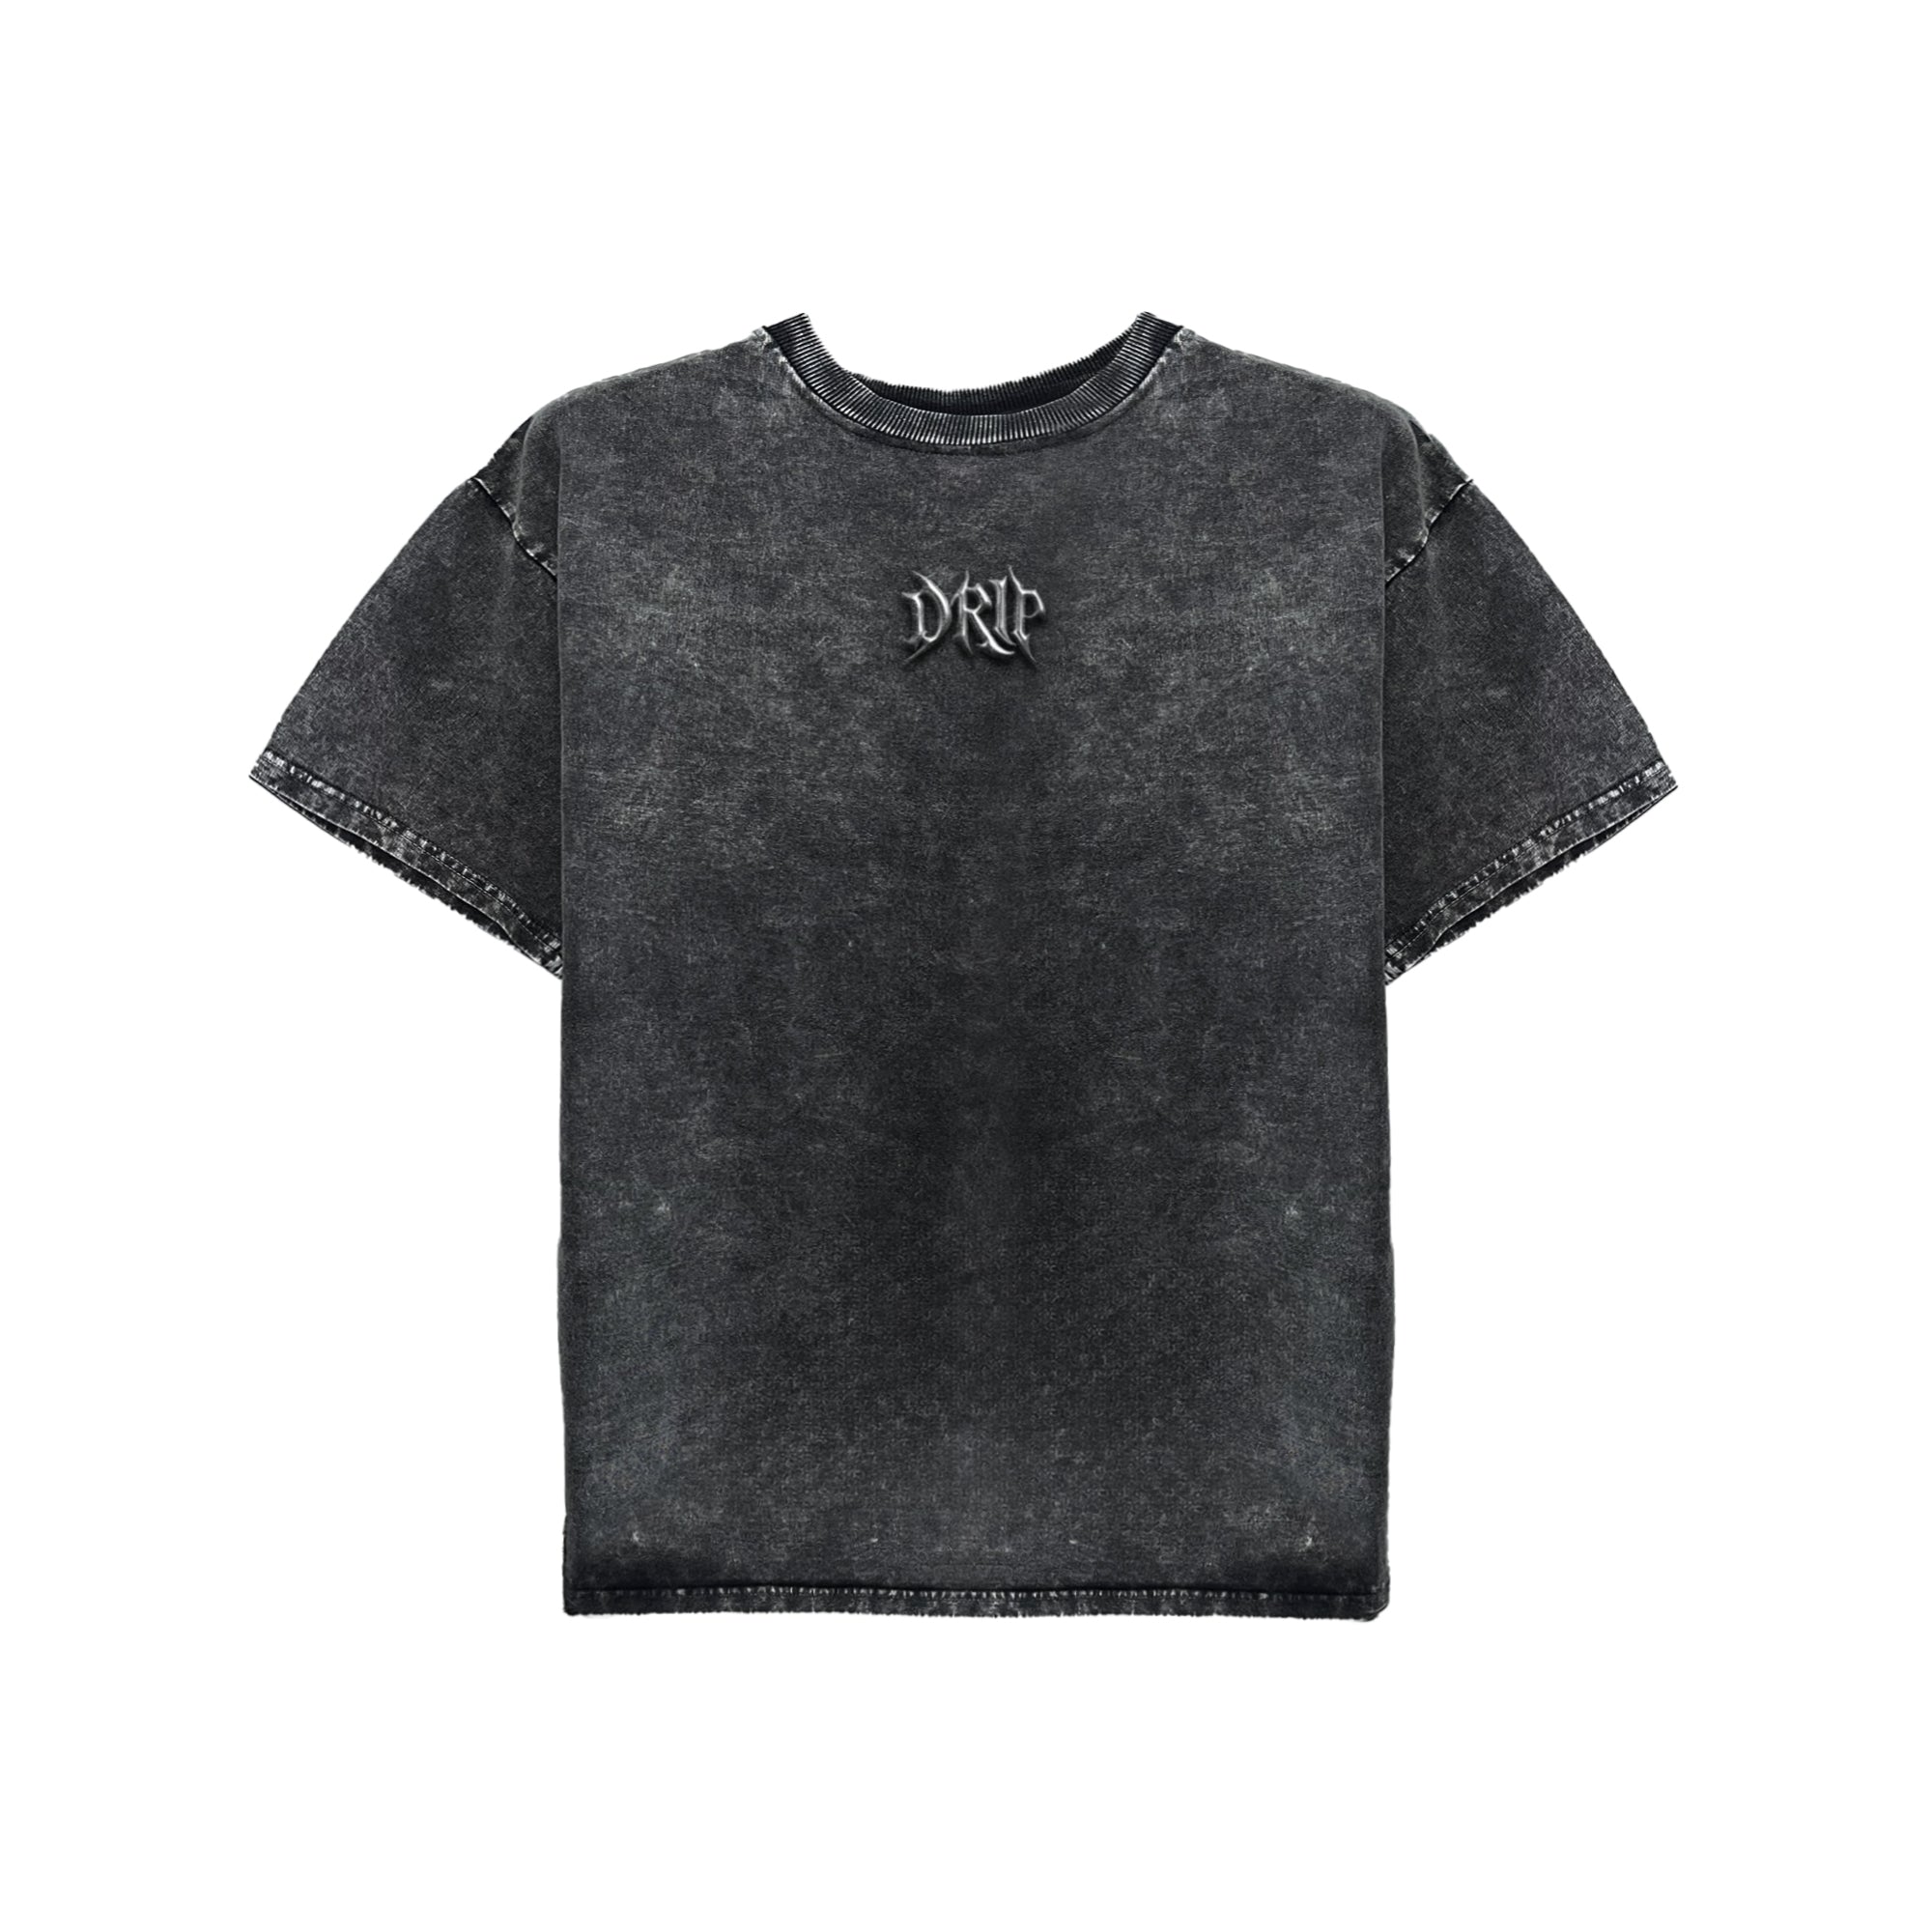 Washed Basic in Charcoal Black